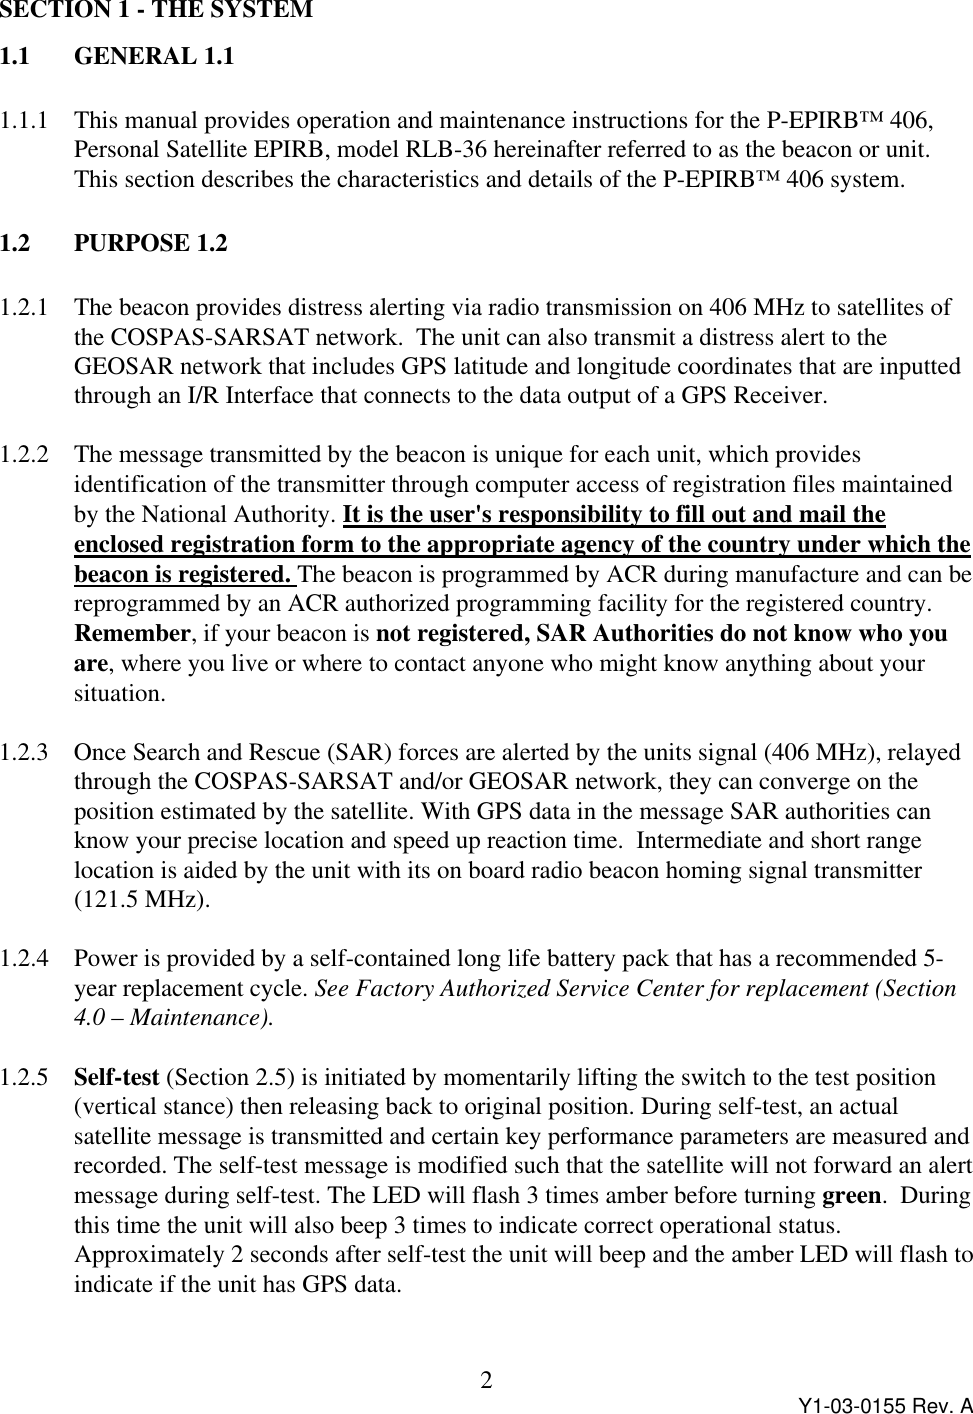 Y1-03-0155 Rev. A2SECTION 1 - THE SYSTEM1.1 GENERAL 1.11.1.1 This manual provides operation and maintenance instructions for the P-EPIRB™ 406,Personal Satellite EPIRB, model RLB-36 hereinafter referred to as the beacon or unit.This section describes the characteristics and details of the P-EPIRB™ 406 system.1.2  PURPOSE 1.21.2.1 The beacon provides distress alerting via radio transmission on 406 MHz to satellites ofthe COSPAS-SARSAT network.  The unit can also transmit a distress alert to theGEOSAR network that includes GPS latitude and longitude coordinates that are inputtedthrough an I/R Interface that connects to the data output of a GPS Receiver.1.2.2 The message transmitted by the beacon is unique for each unit, which providesidentification of the transmitter through computer access of registration files maintainedby the National Authority. It is the user&apos;s responsibility to fill out and mail theenclosed registration form to the appropriate agency of the country under which thebeacon is registered. The beacon is programmed by ACR during manufacture and can bereprogrammed by an ACR authorized programming facility for the registered country.Remember, if your beacon is not registered, SAR Authorities do not know who youare, where you live or where to contact anyone who might know anything about yoursituation.1.2.3 Once Search and Rescue (SAR) forces are alerted by the units signal (406 MHz), relayedthrough the COSPAS-SARSAT and/or GEOSAR network, they can converge on theposition estimated by the satellite. With GPS data in the message SAR authorities canknow your precise location and speed up reaction time.  Intermediate and short rangelocation is aided by the unit with its on board radio beacon homing signal transmitter(121.5 MHz).1.2.4 Power is provided by a self-contained long life battery pack that has a recommended 5-year replacement cycle. See Factory Authorized Service Center for replacement (Section4.0 – Maintenance).1.2.5 Self-test (Section 2.5) is initiated by momentarily lifting the switch to the test position(vertical stance) then releasing back to original position. During self-test, an actualsatellite message is transmitted and certain key performance parameters are measured andrecorded. The self-test message is modified such that the satellite will not forward an alertmessage during self-test. The LED will flash 3 times amber before turning green.  Duringthis time the unit will also beep 3 times to indicate correct operational status.Approximately 2 seconds after self-test the unit will beep and the amber LED will flash toindicate if the unit has GPS data.